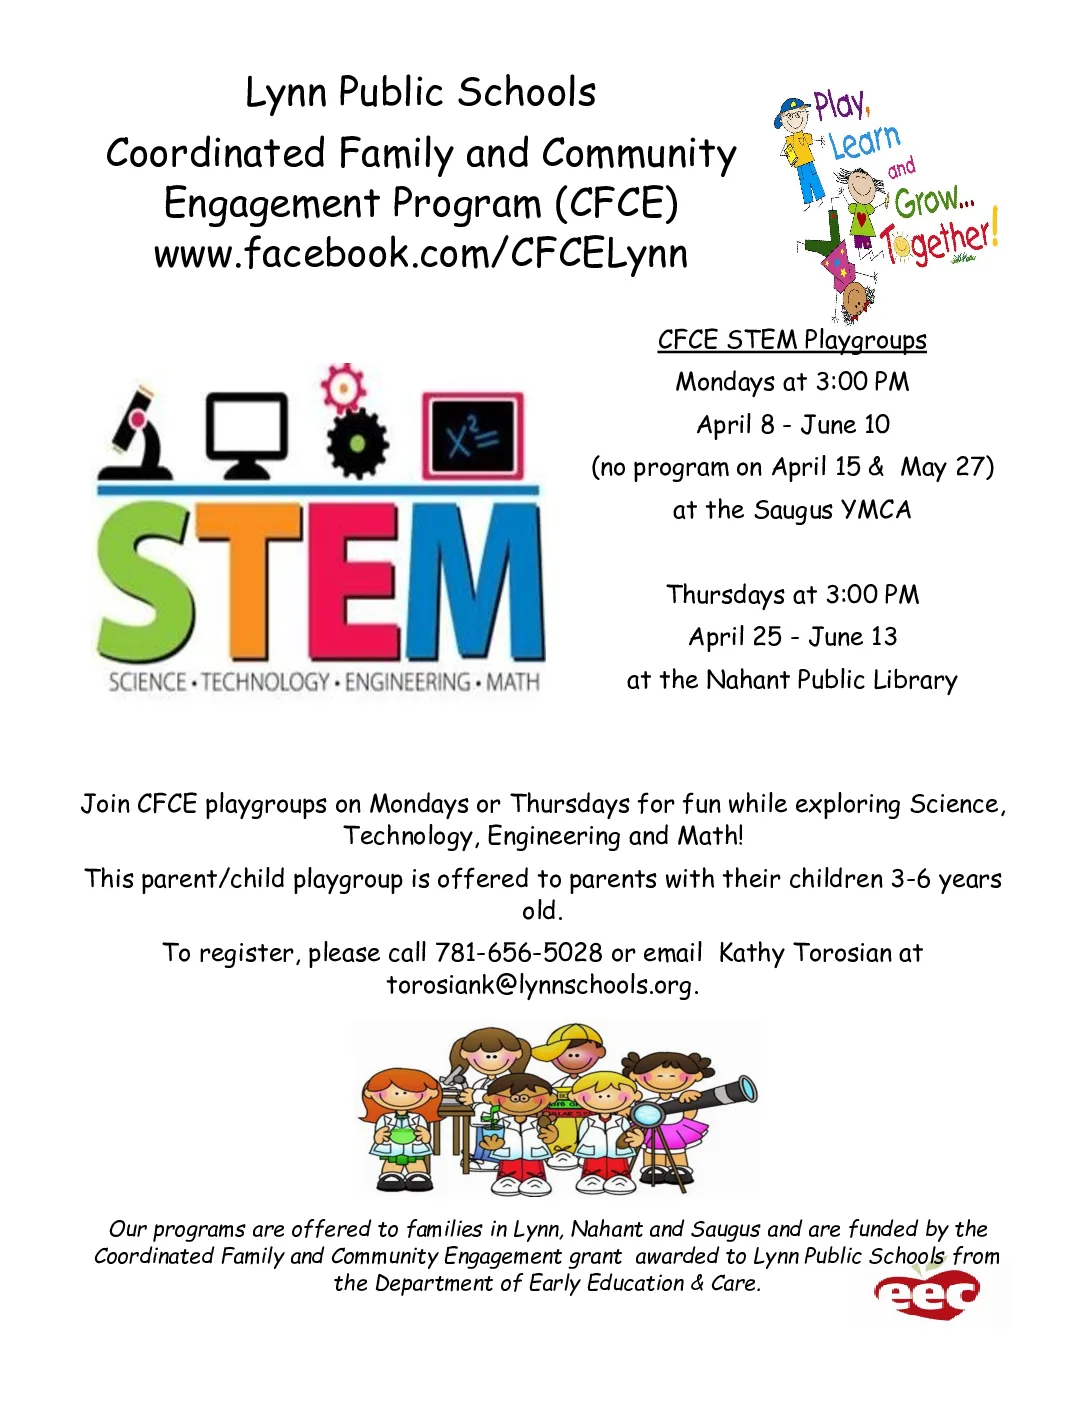 STEM Playgroup Returns for its Third Session